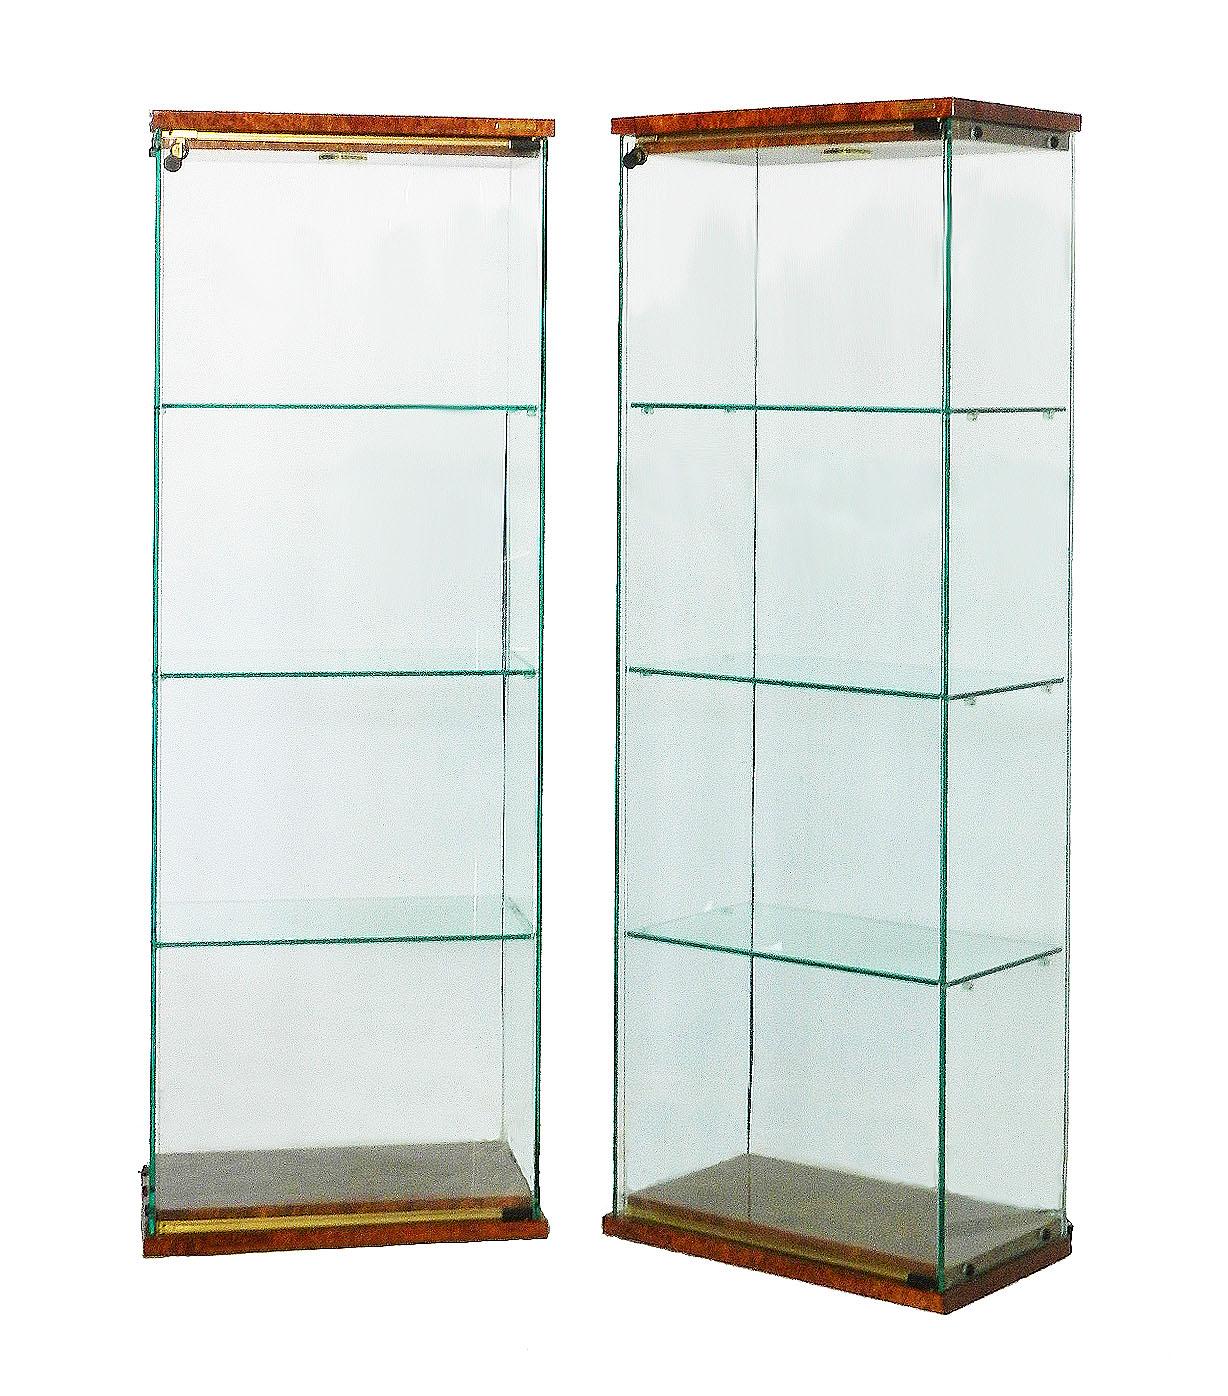 Pair of Pierre Vandel Vitrines French midcentury, circa 1970
Illuminated showcase cabinets
Original labels Pierre Vandel Paris
Each has an internal top light
Doors with locks and key
Glass shelves
High shine burr walnut top and base
Very good